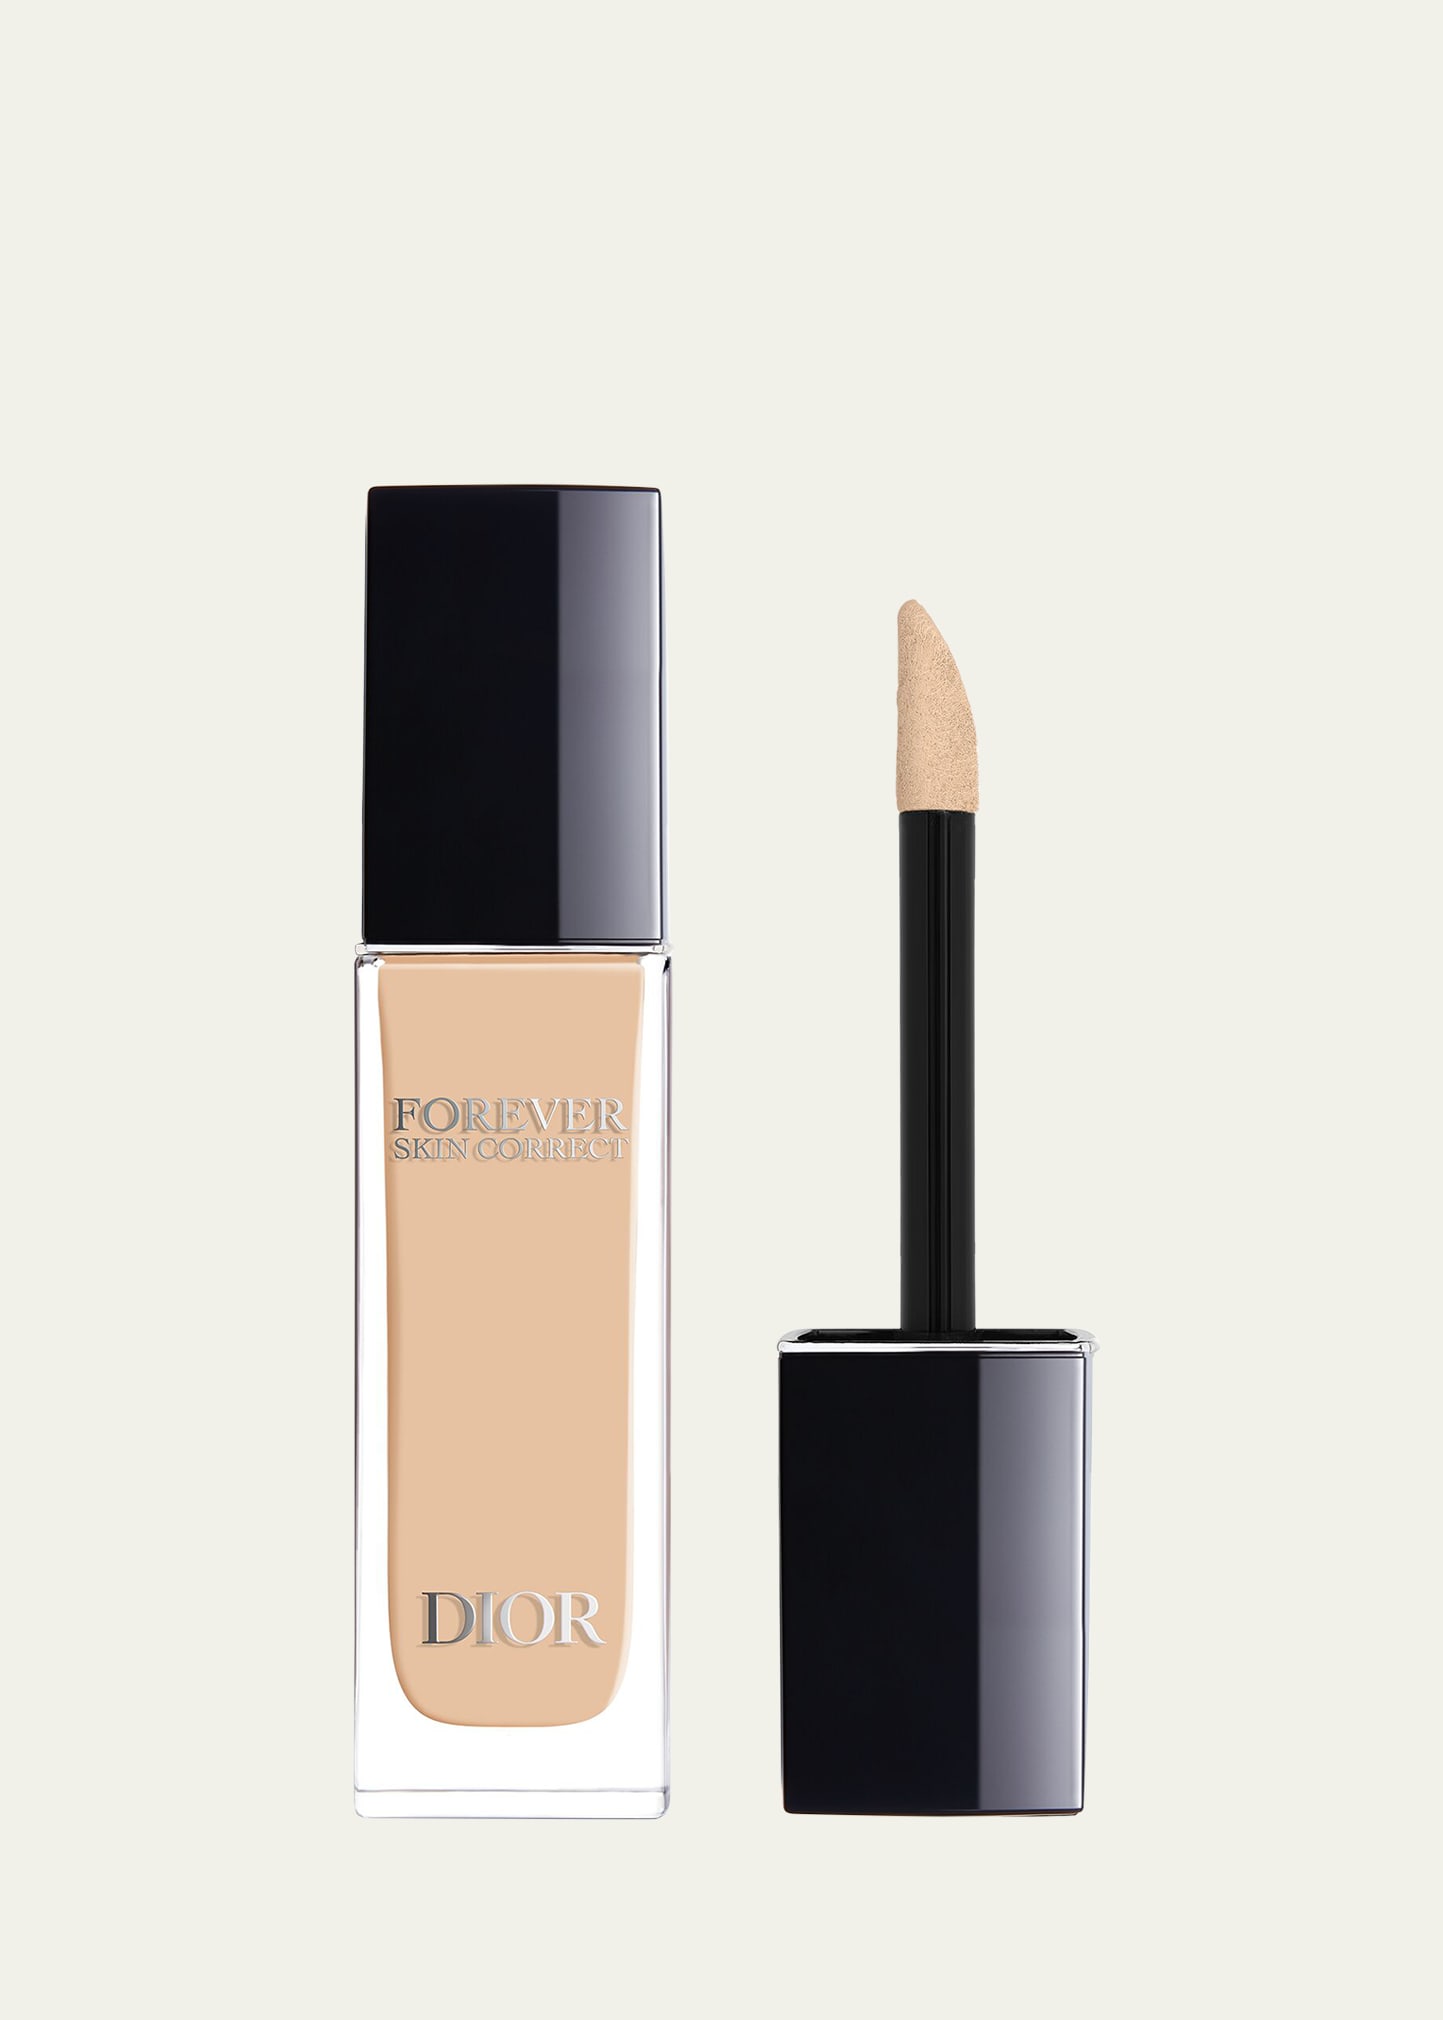 Dior Forever Skin Correct Full-coverage Concealer In 2 W Warm